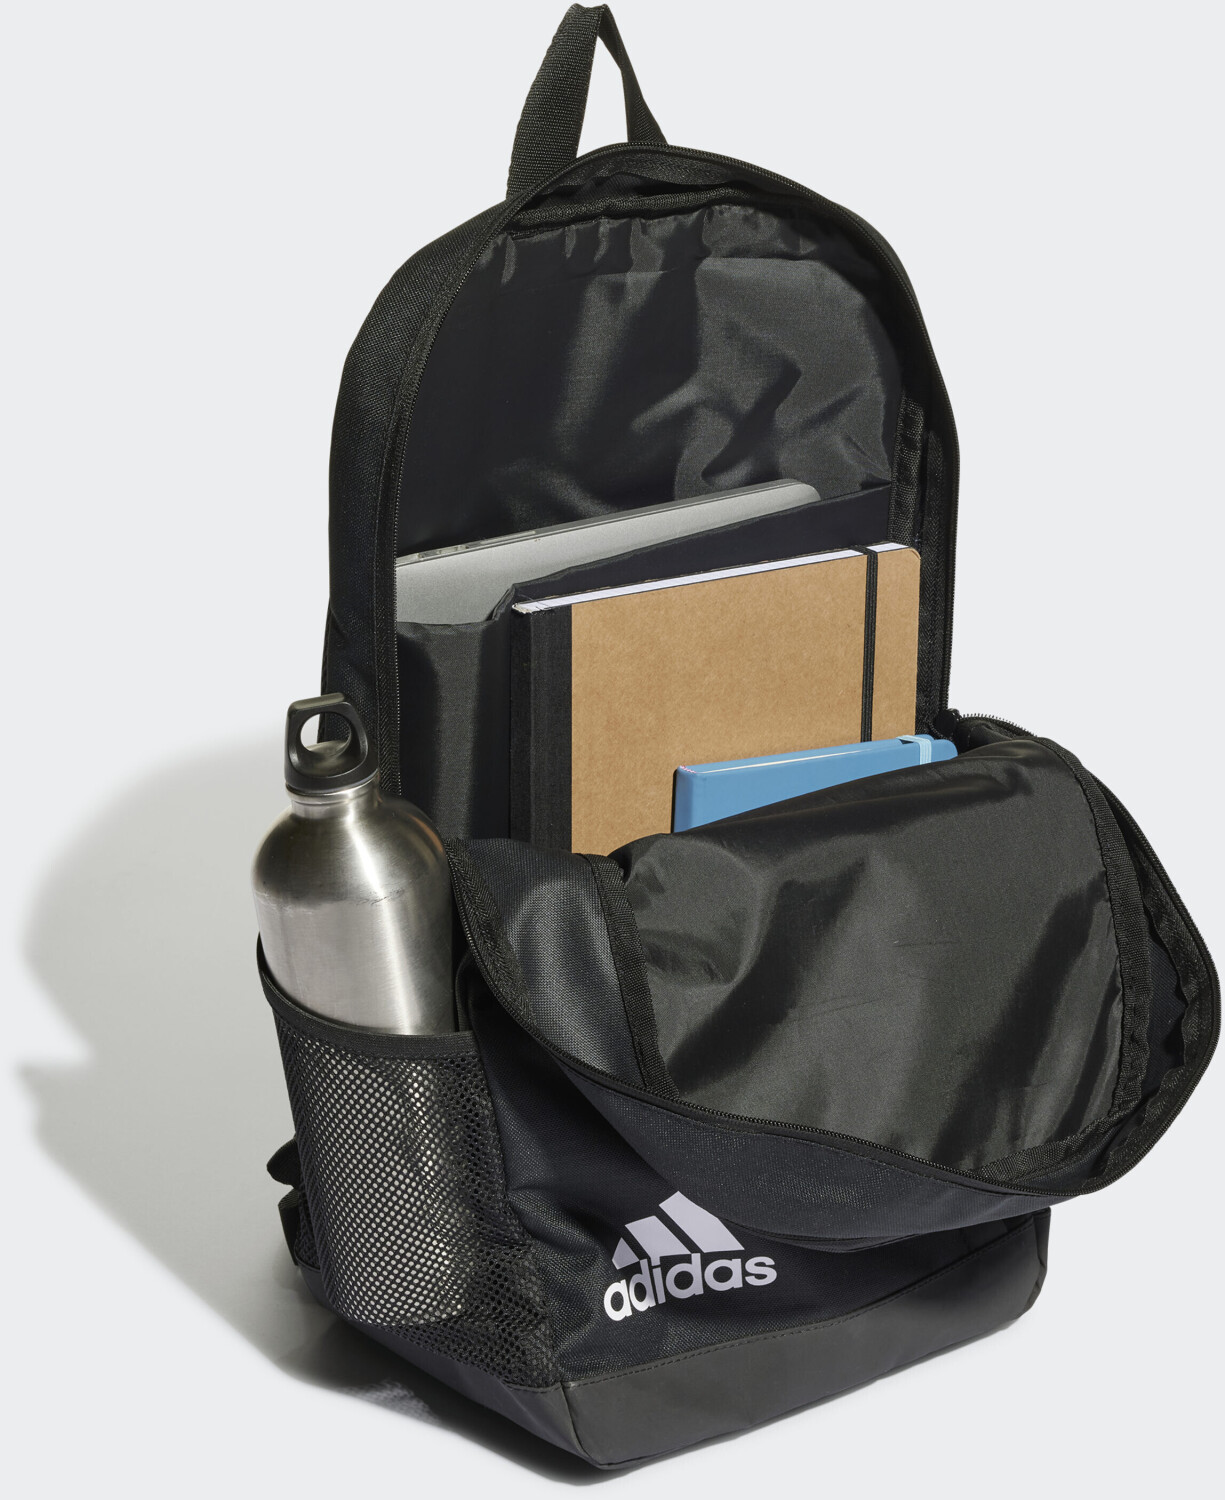 Vermindering Rally personeelszaken Buy Adidas Motion Badge of Sport Backpack black/white (HG0356) from £18.99  (Today) – Best Deals on idealo.co.uk